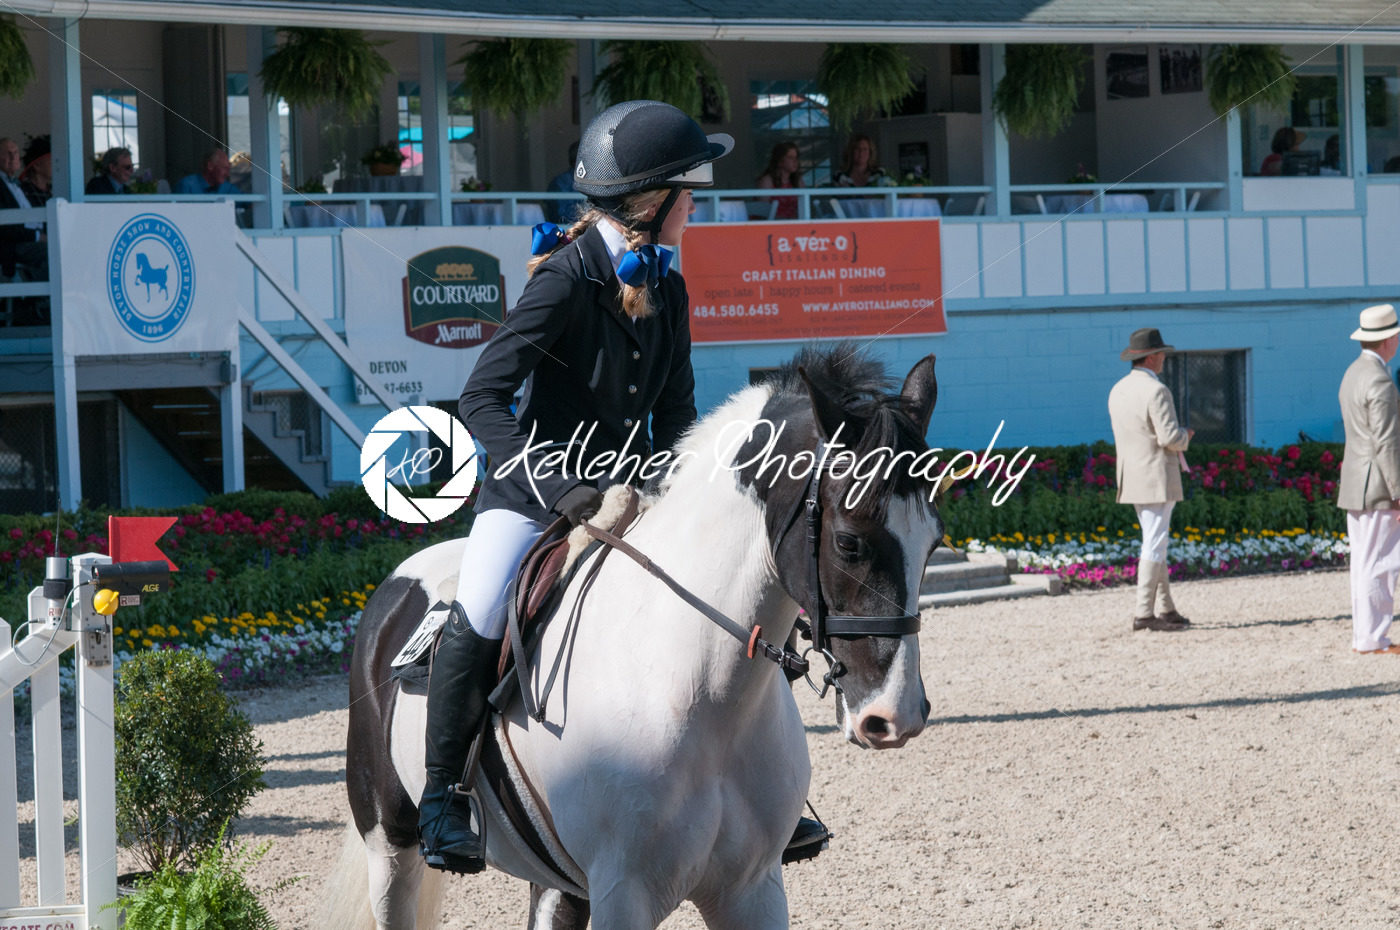 DEVON, PA – MAY 25: Riders performing with their horses at the Devon Horse Show on May 25, 2014 - Kelleher Photography Store